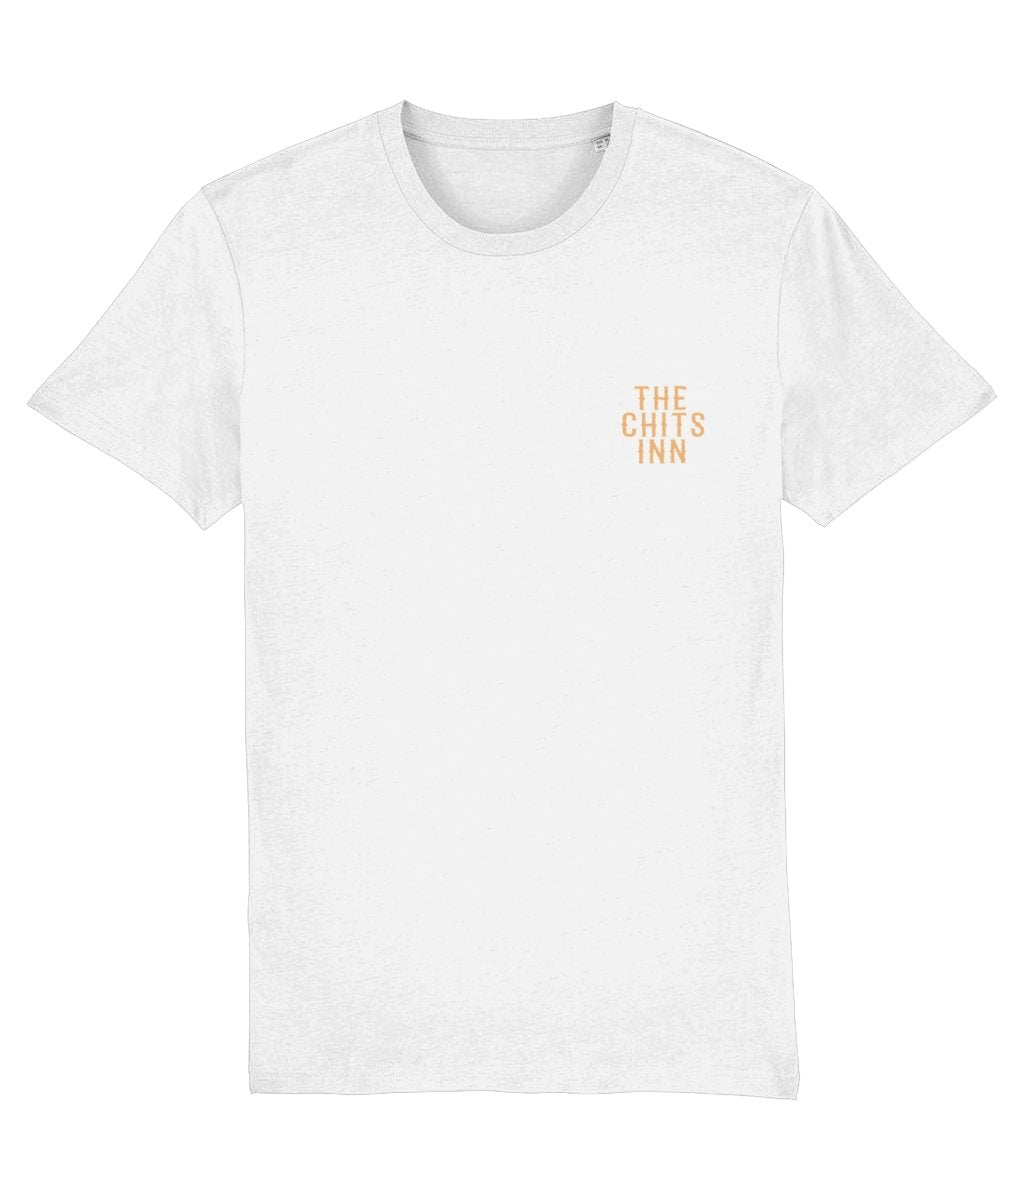 Three Sheets in the Wind Tee - The Chits Inn